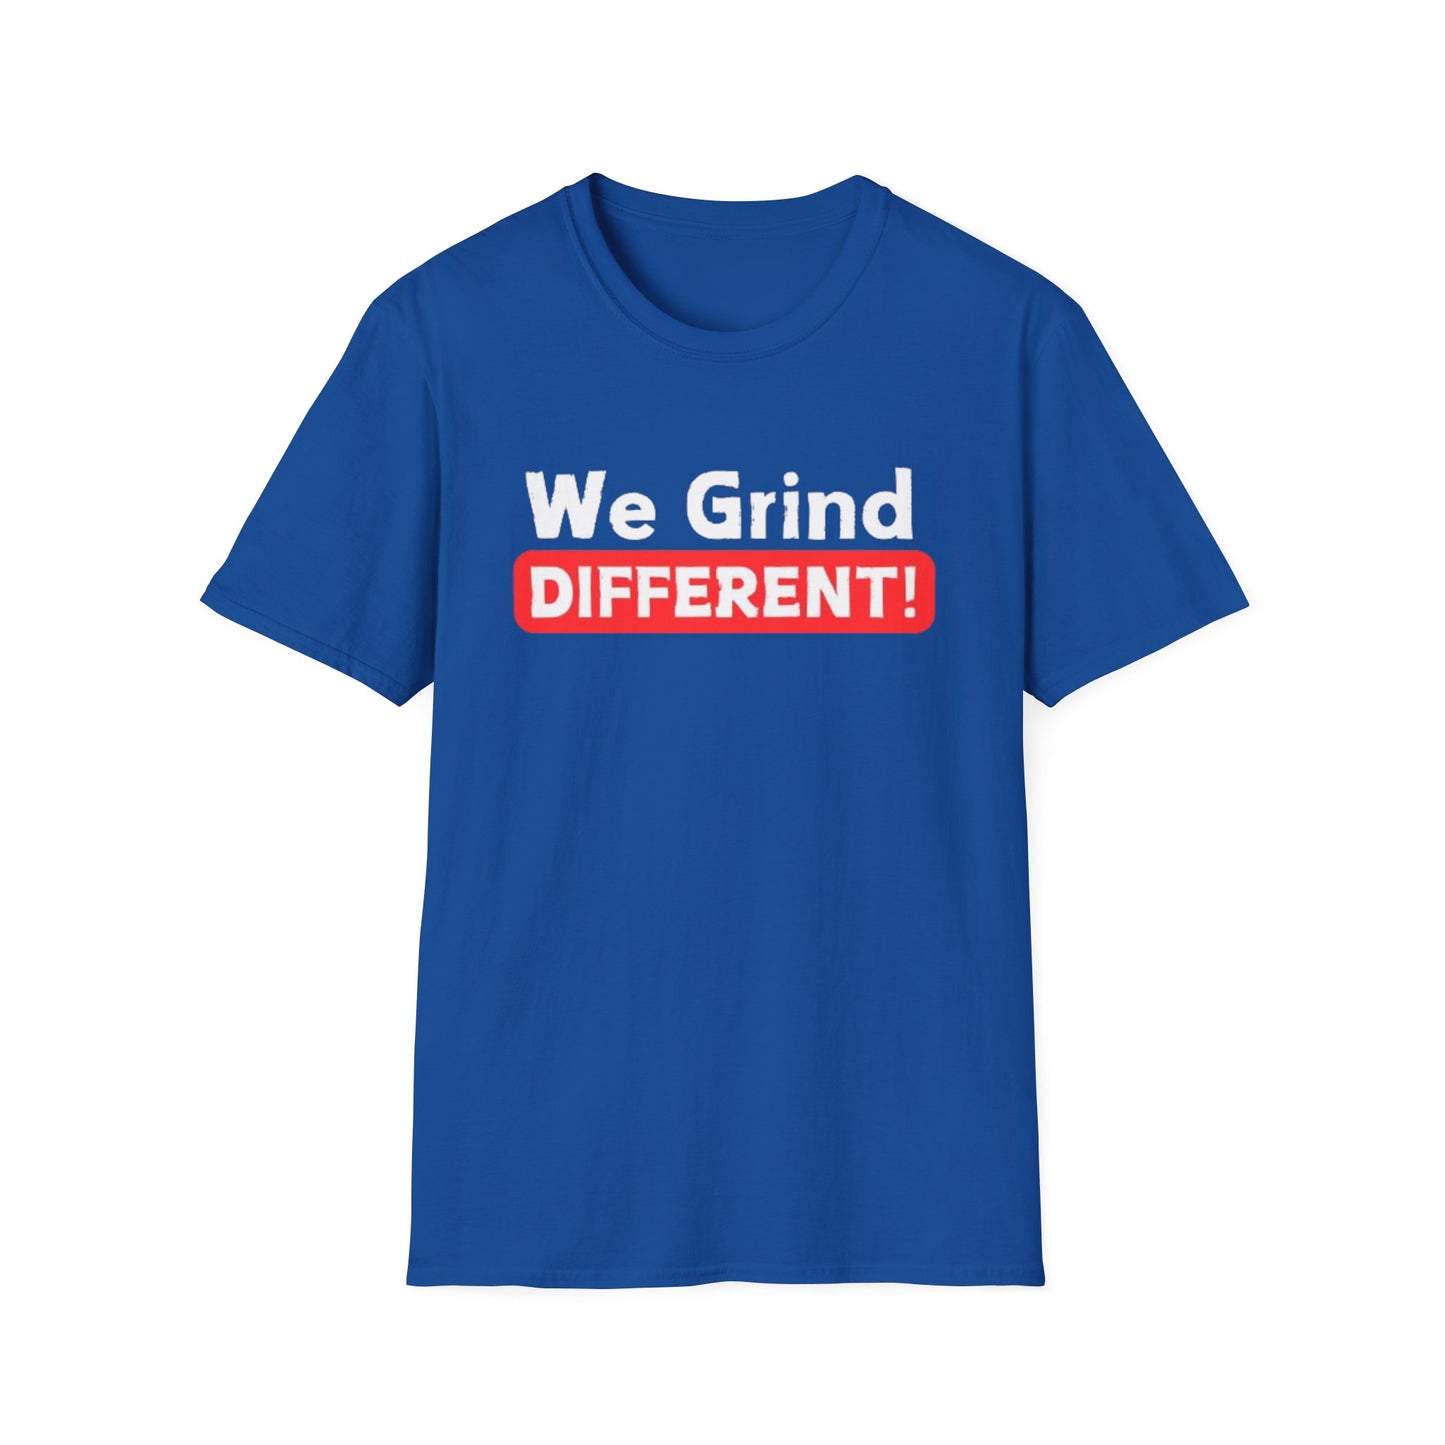 We Grind DIFFERENT Unisex Softstyle T-Shirt